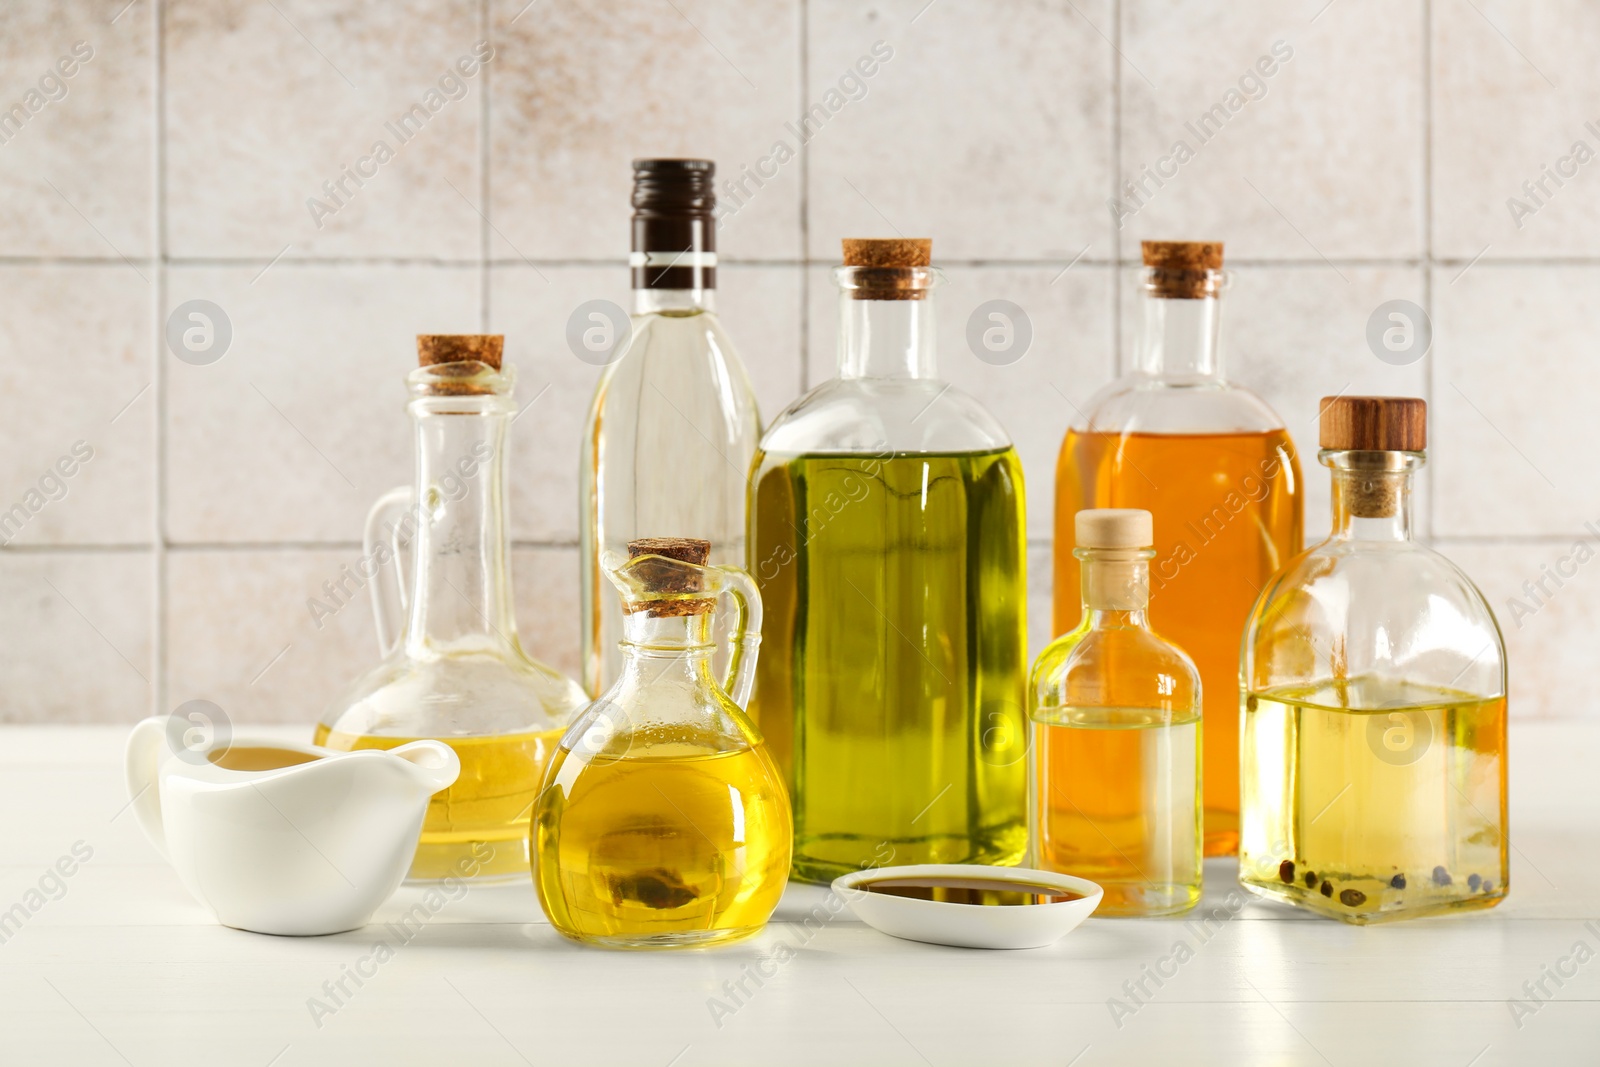 Photo of Vegetable fats. Different oils in glass bottles and dishware on white wooden table against tiled wall